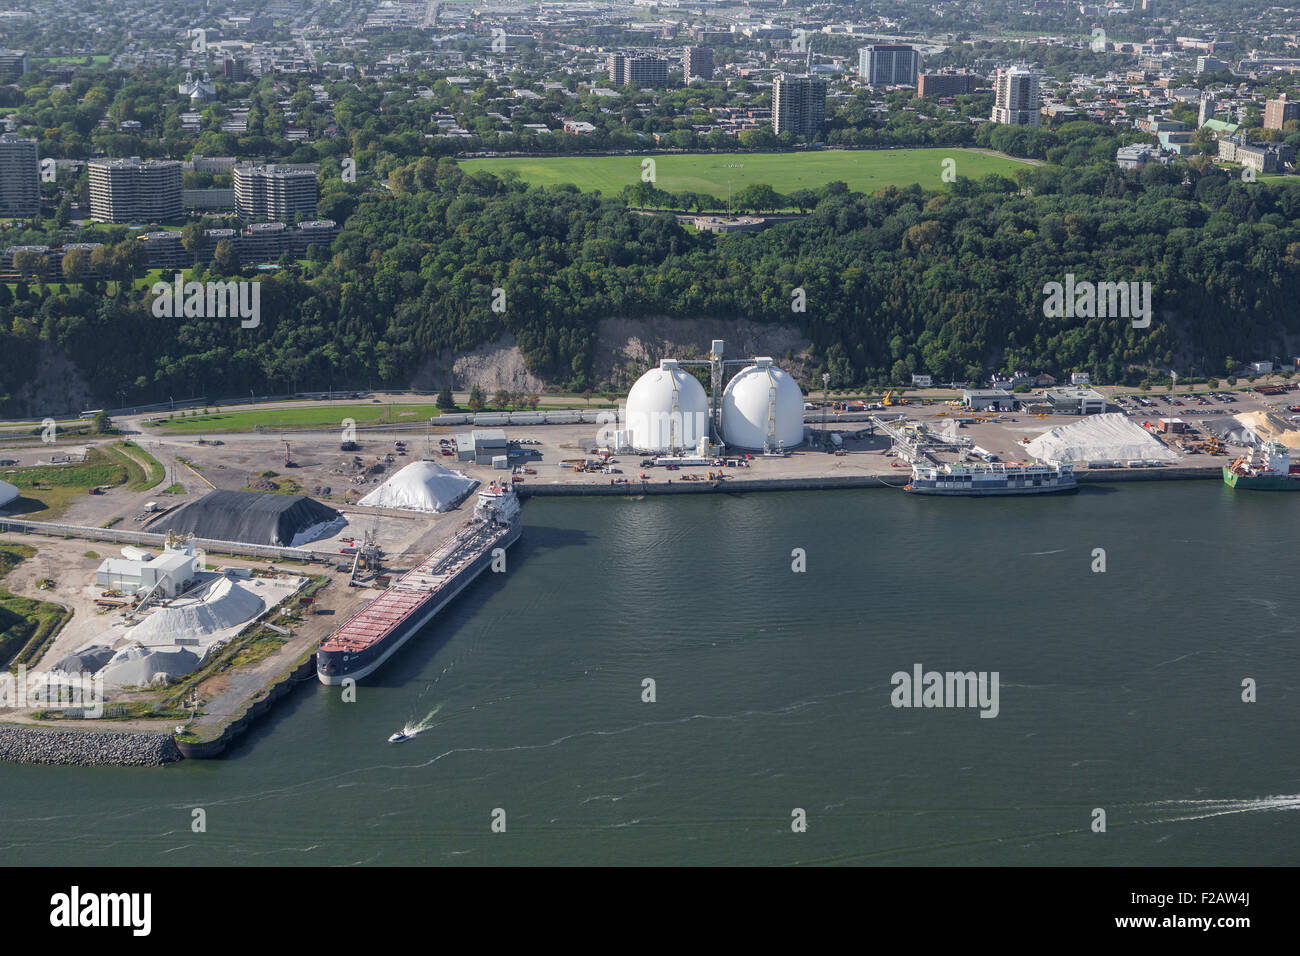 The Anse-au-Foulon area of the Quebec city port is pictured in this aerial photo Stock Photo